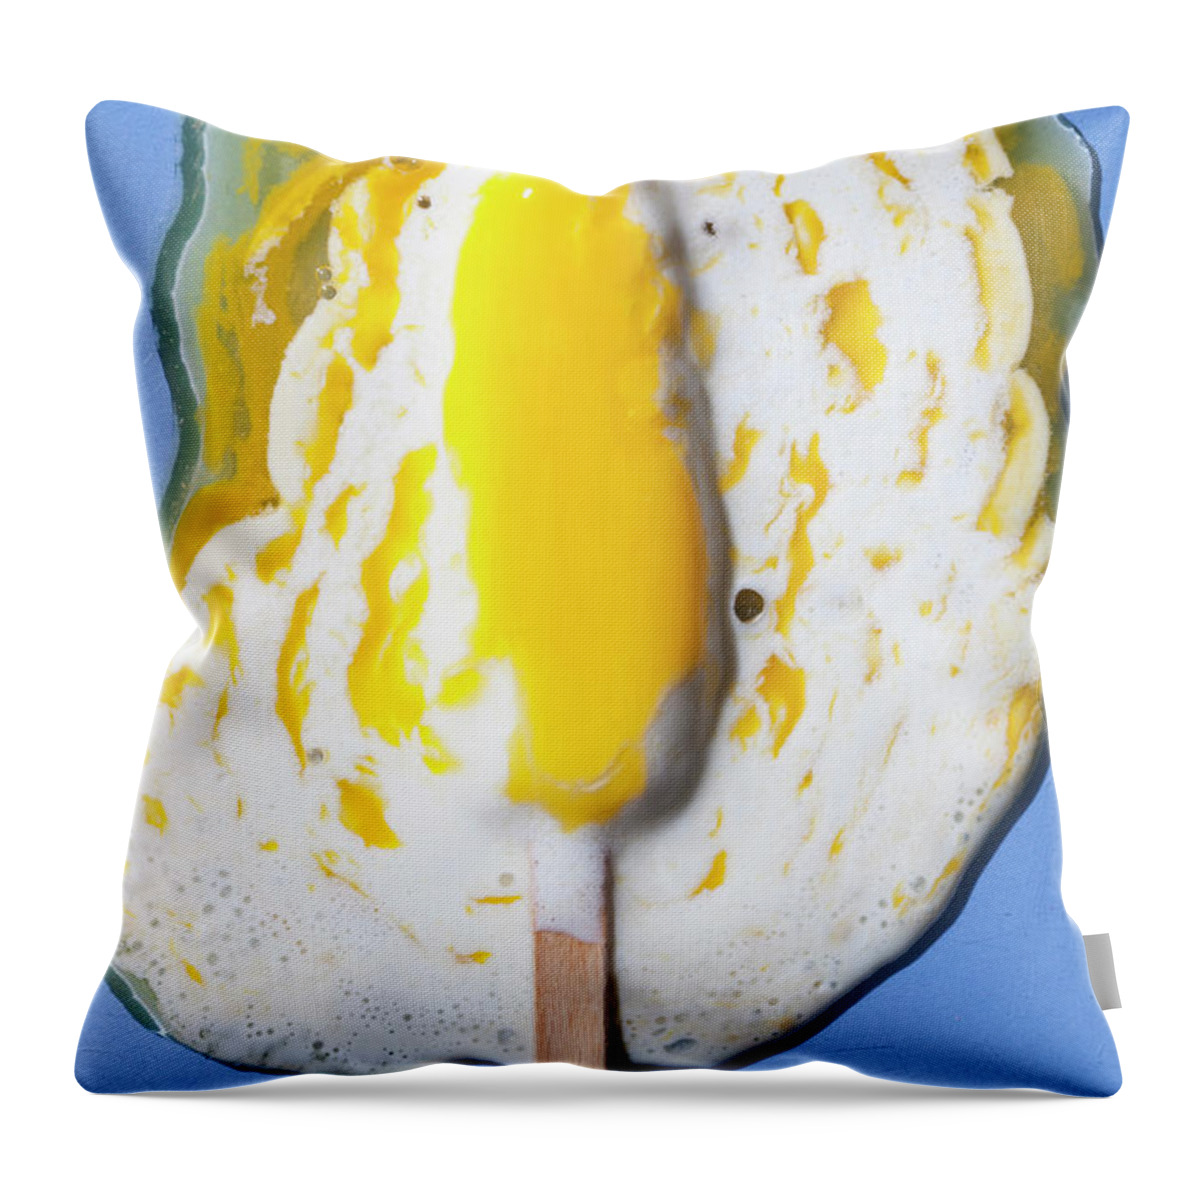 Melting Throw Pillow featuring the photograph Melted Popsicle by Larry Washburn